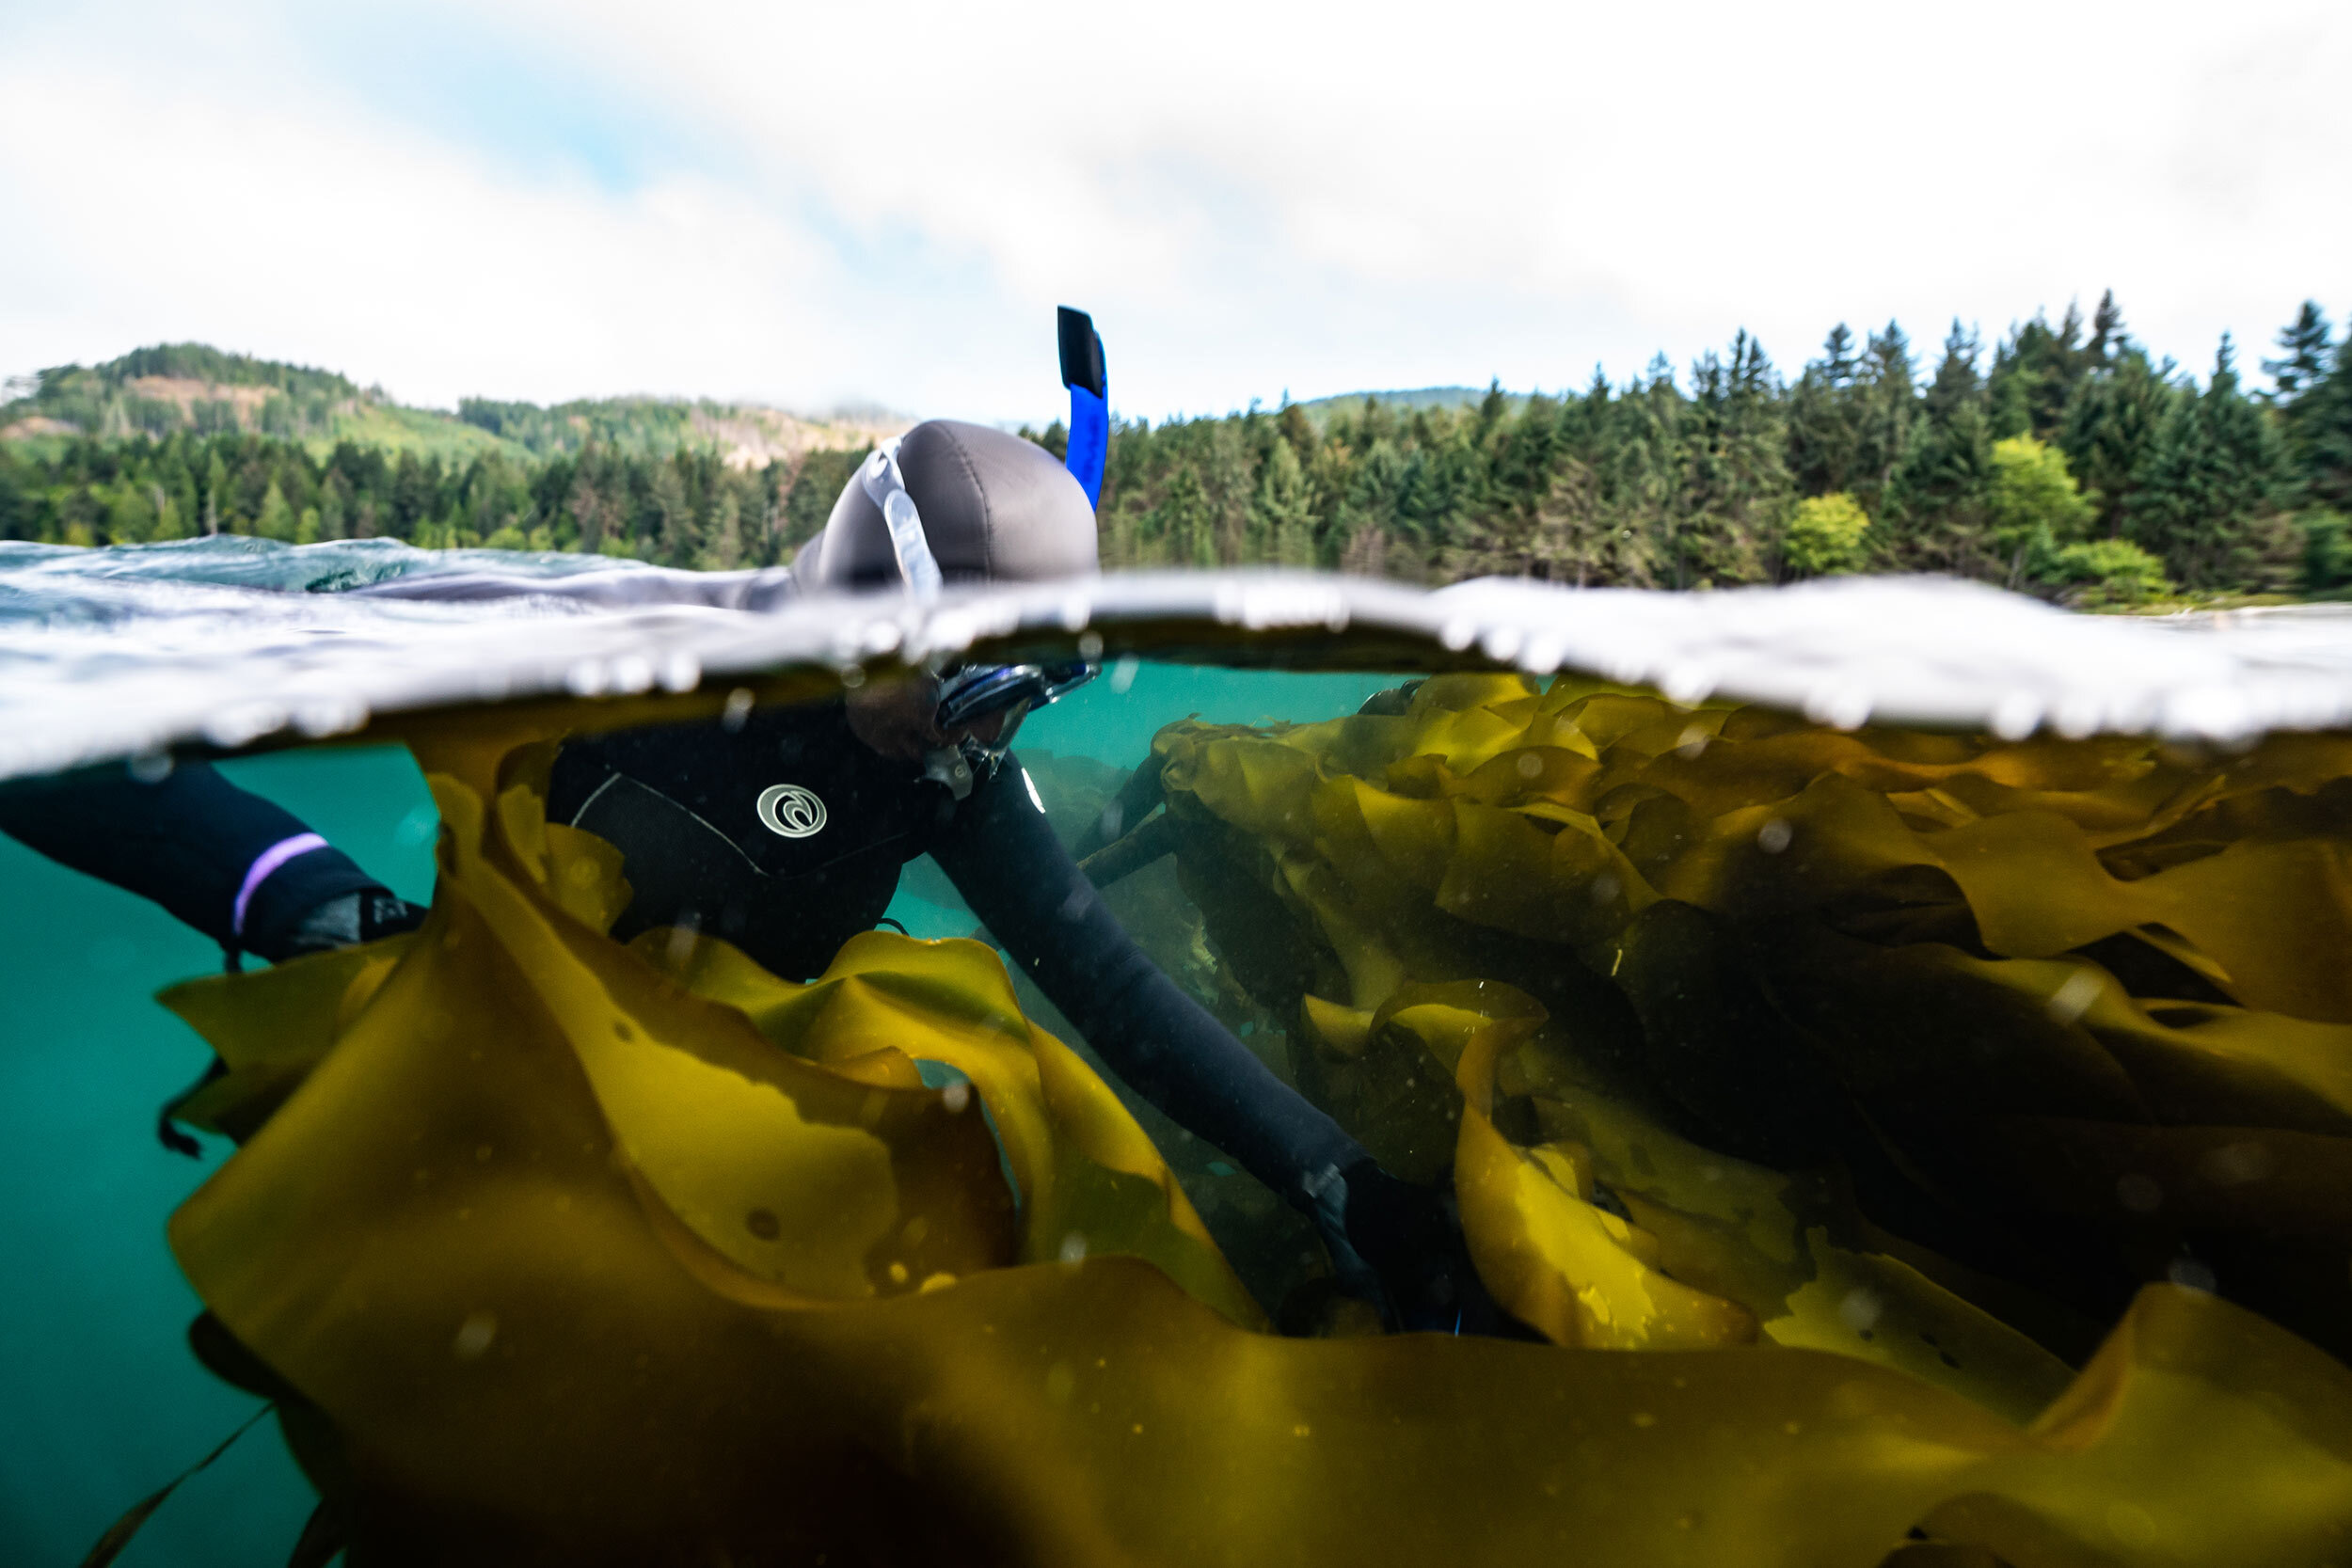  Wild-crafted Seaweed from the Pacific Northwest 